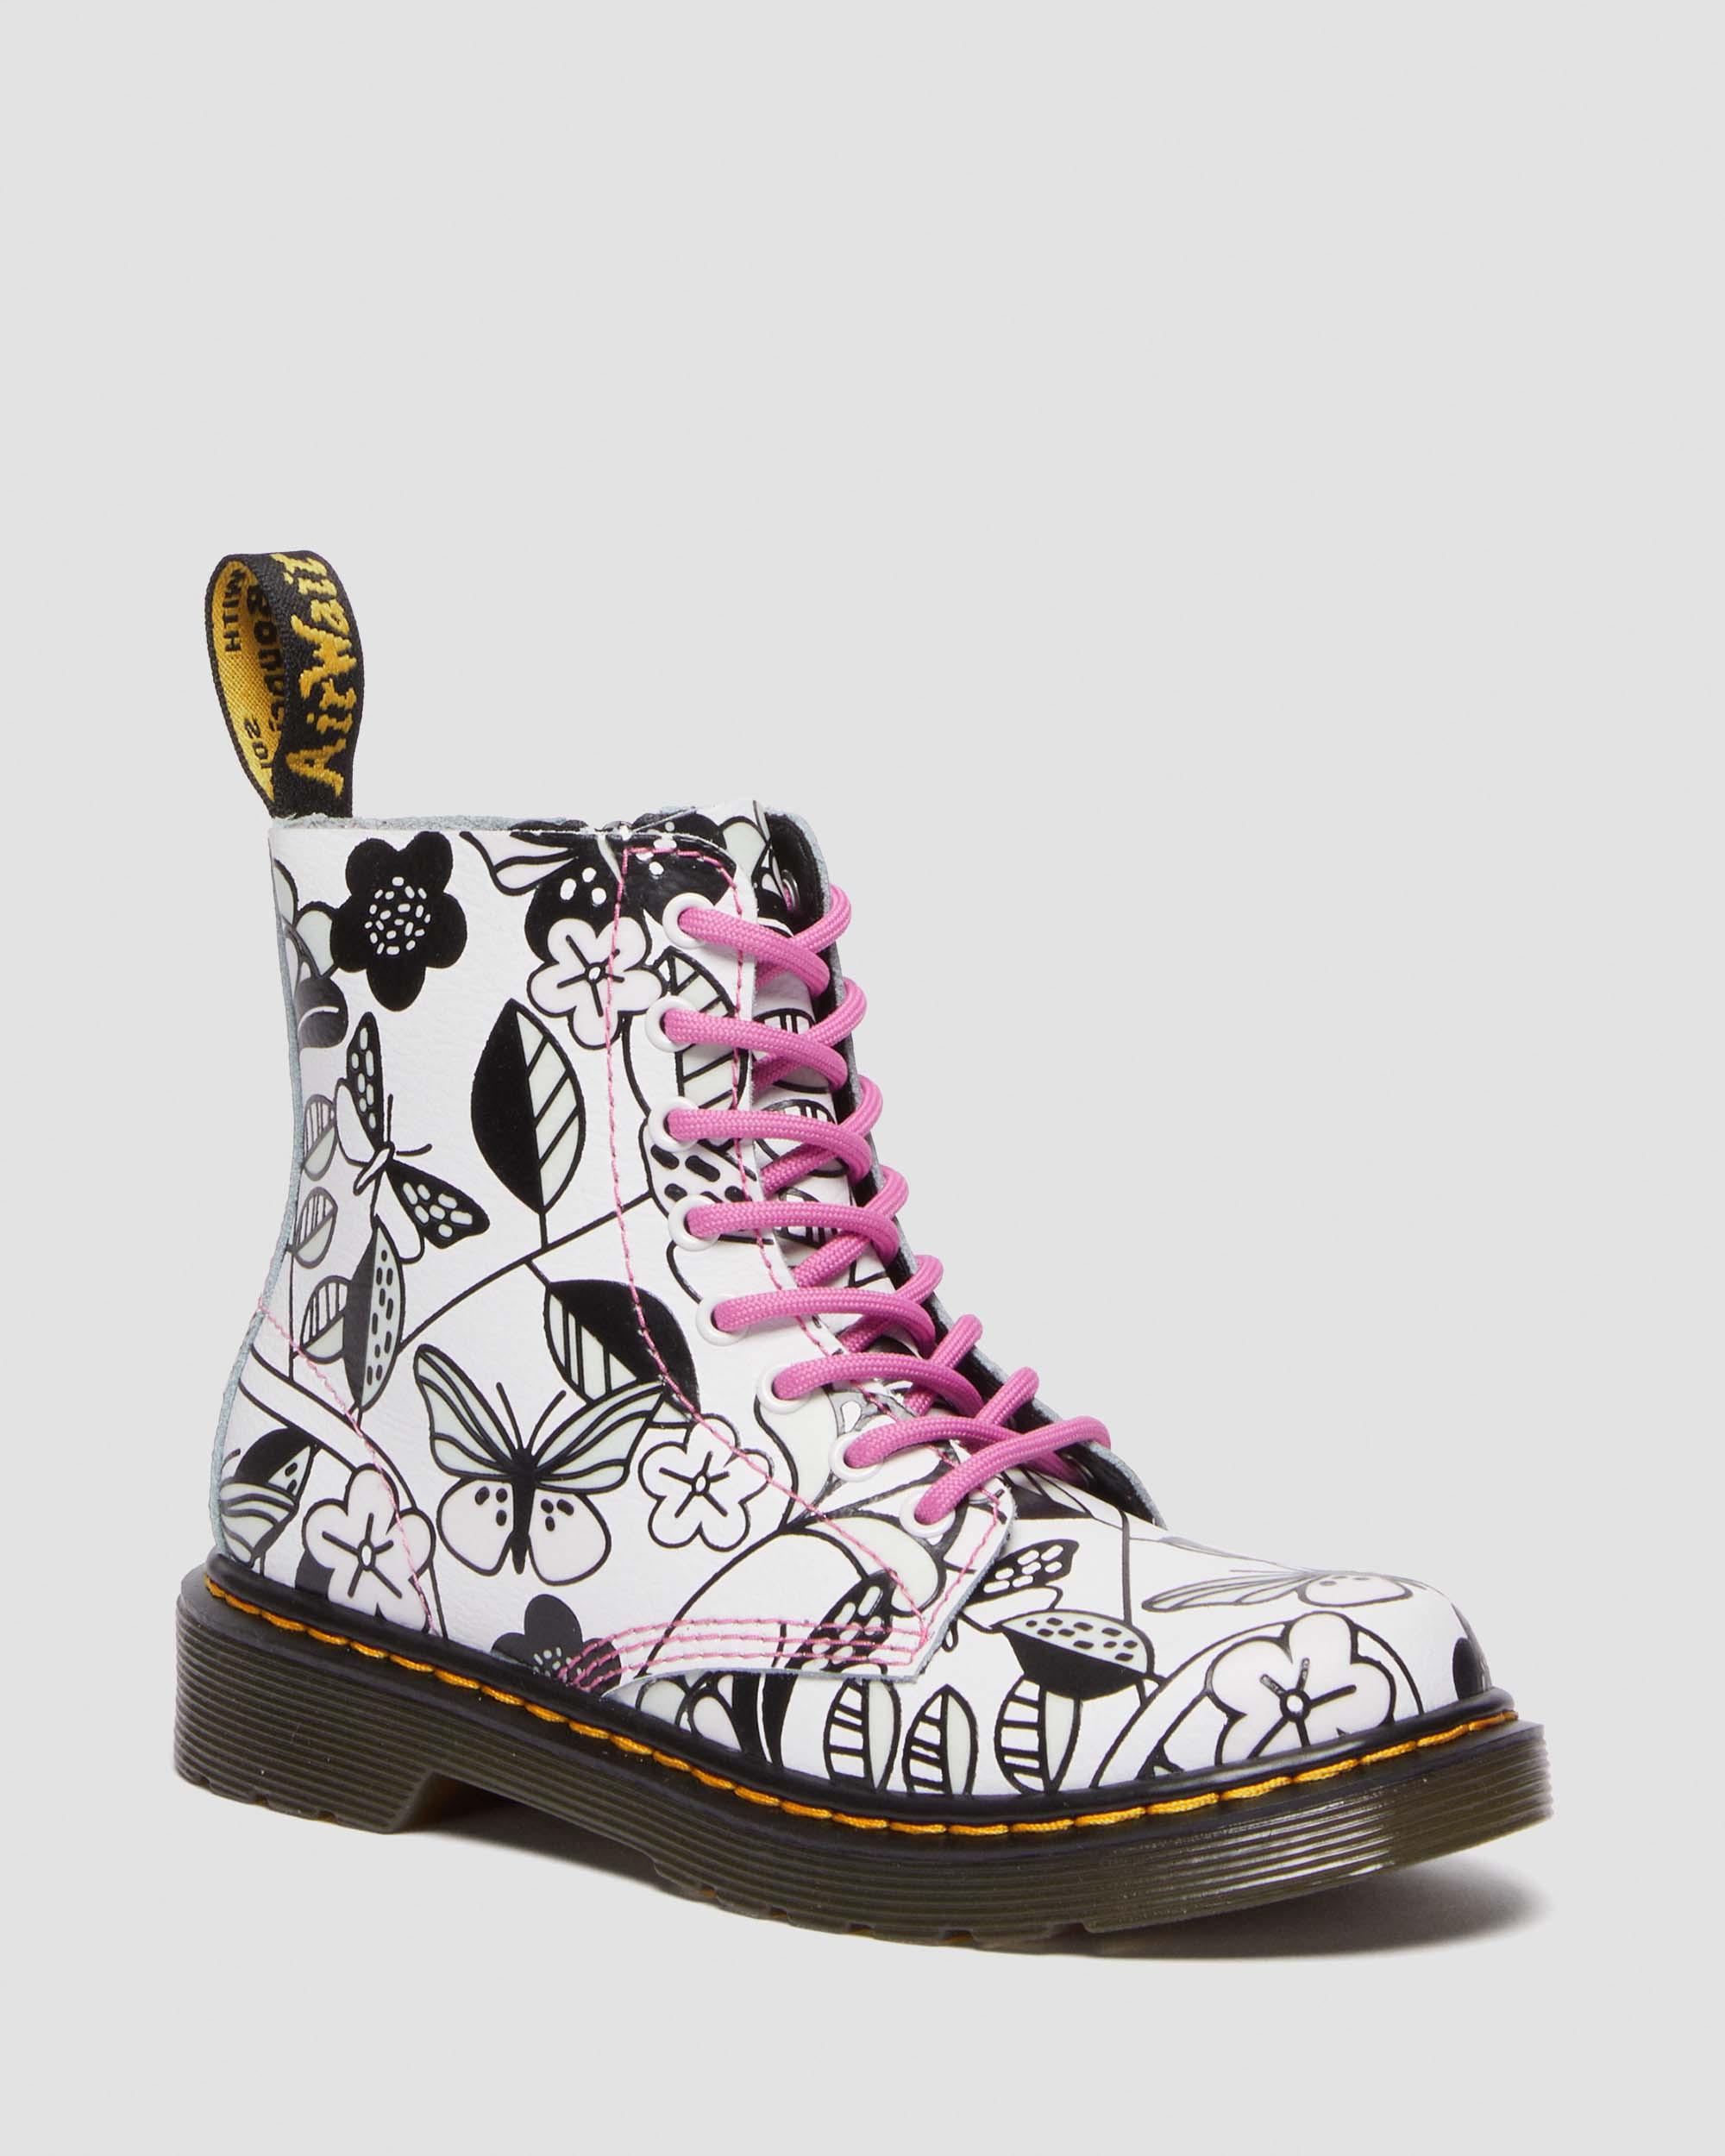 Junior 1460 Meadow Print Leather Lace Up Boots